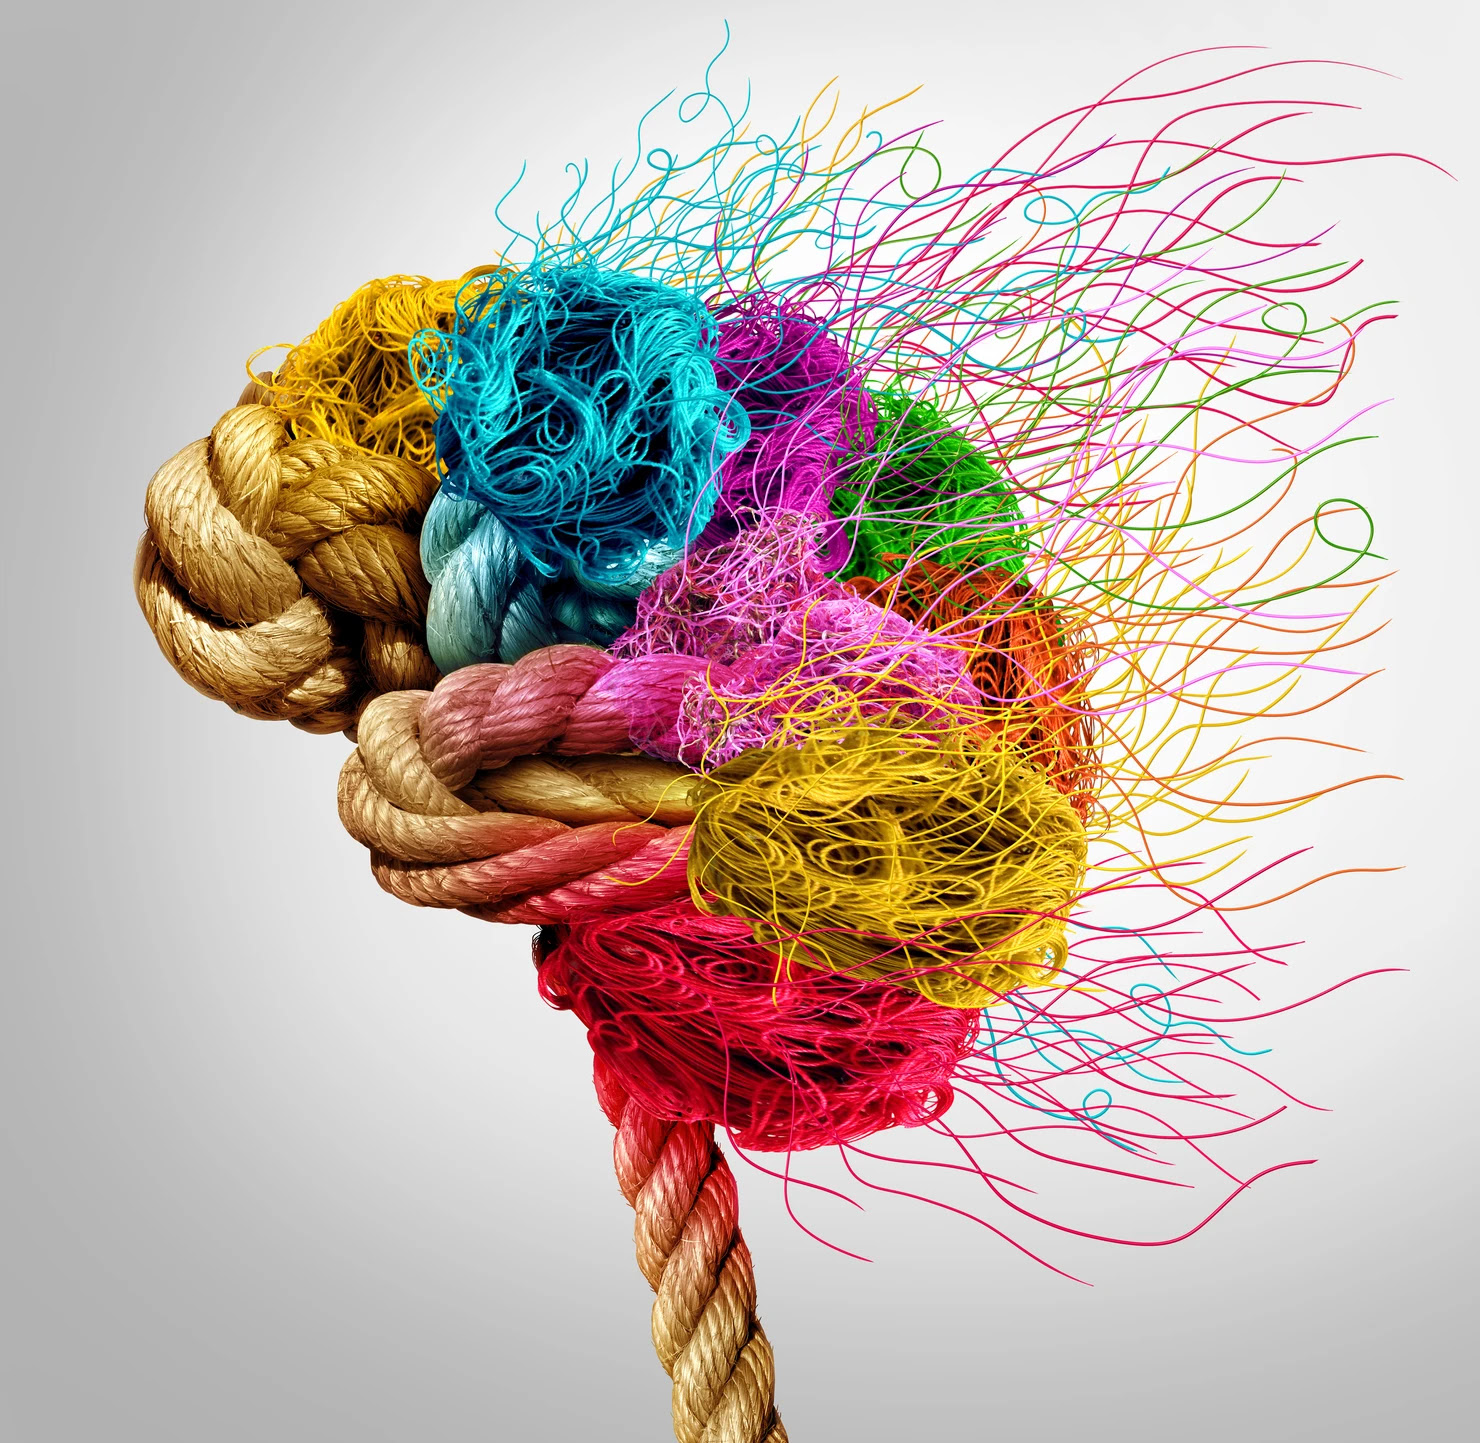 A colorful illustration of a brain